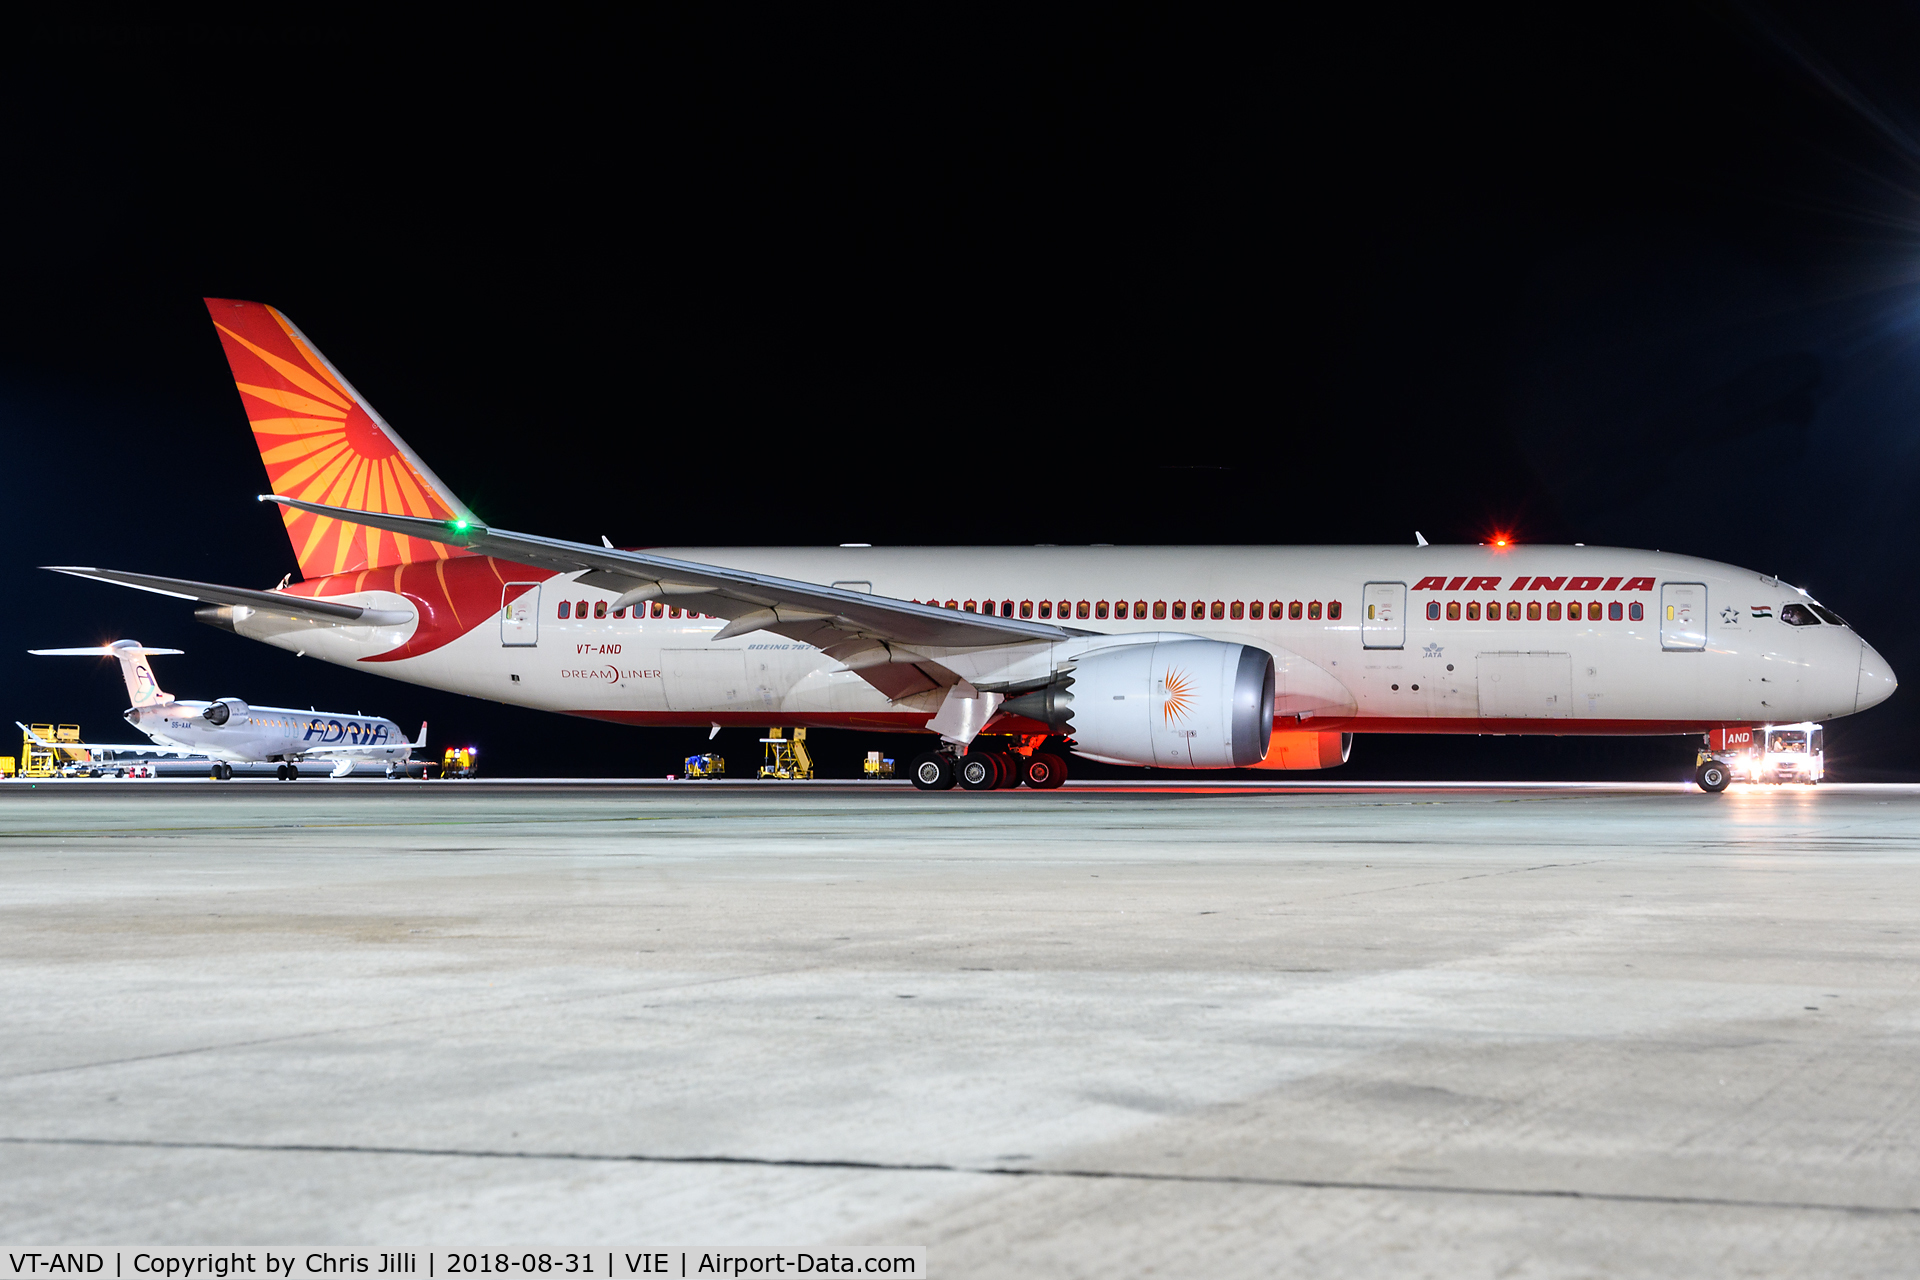 VT-AND, 2011 Boeing 787-8 Dreamliner C/N 36278, Air India